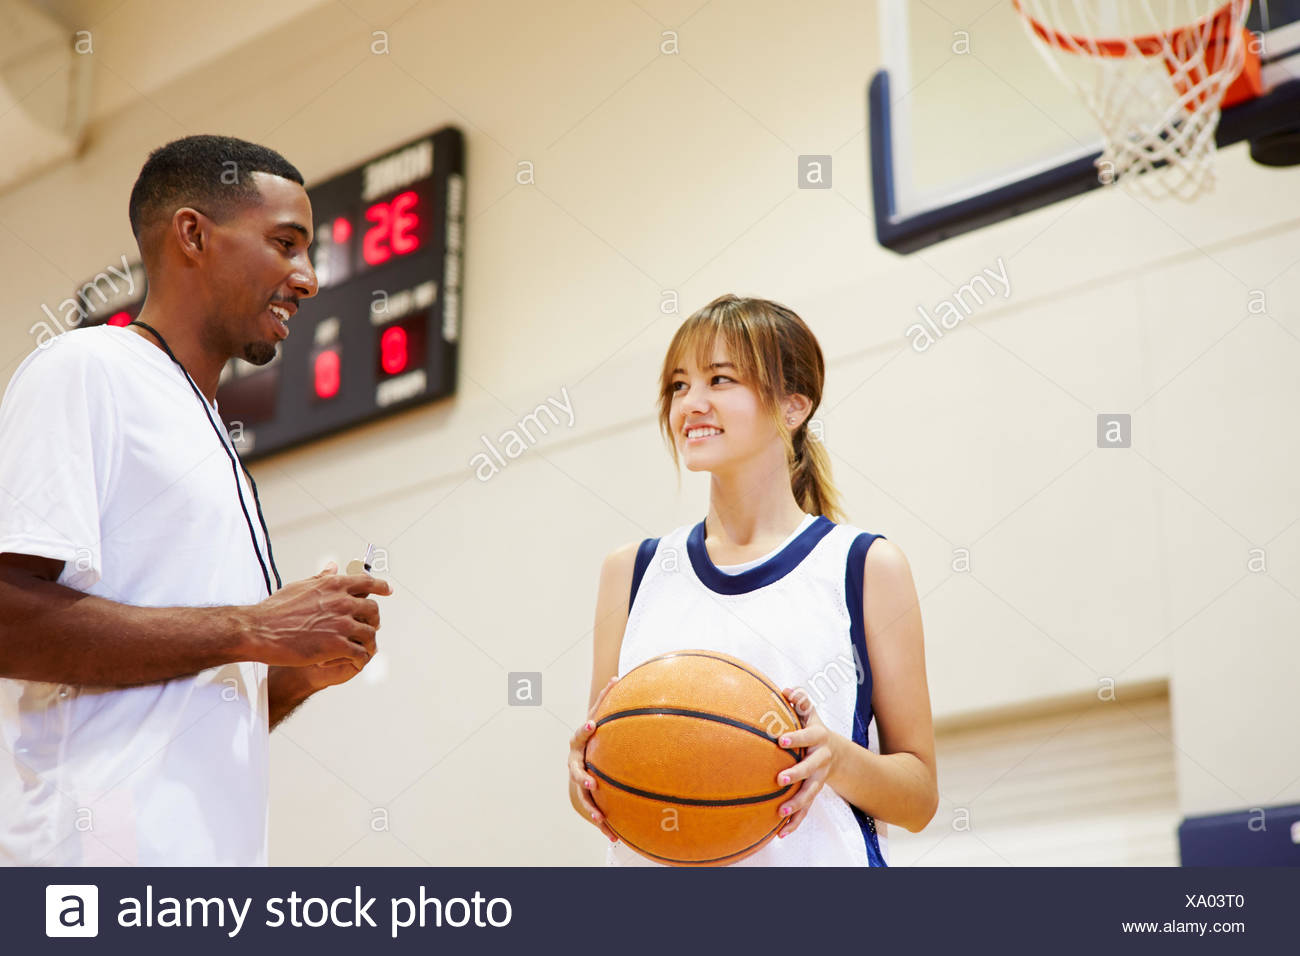 Female High School Basketball Player Talking With Coach Stock Photo - Alamy